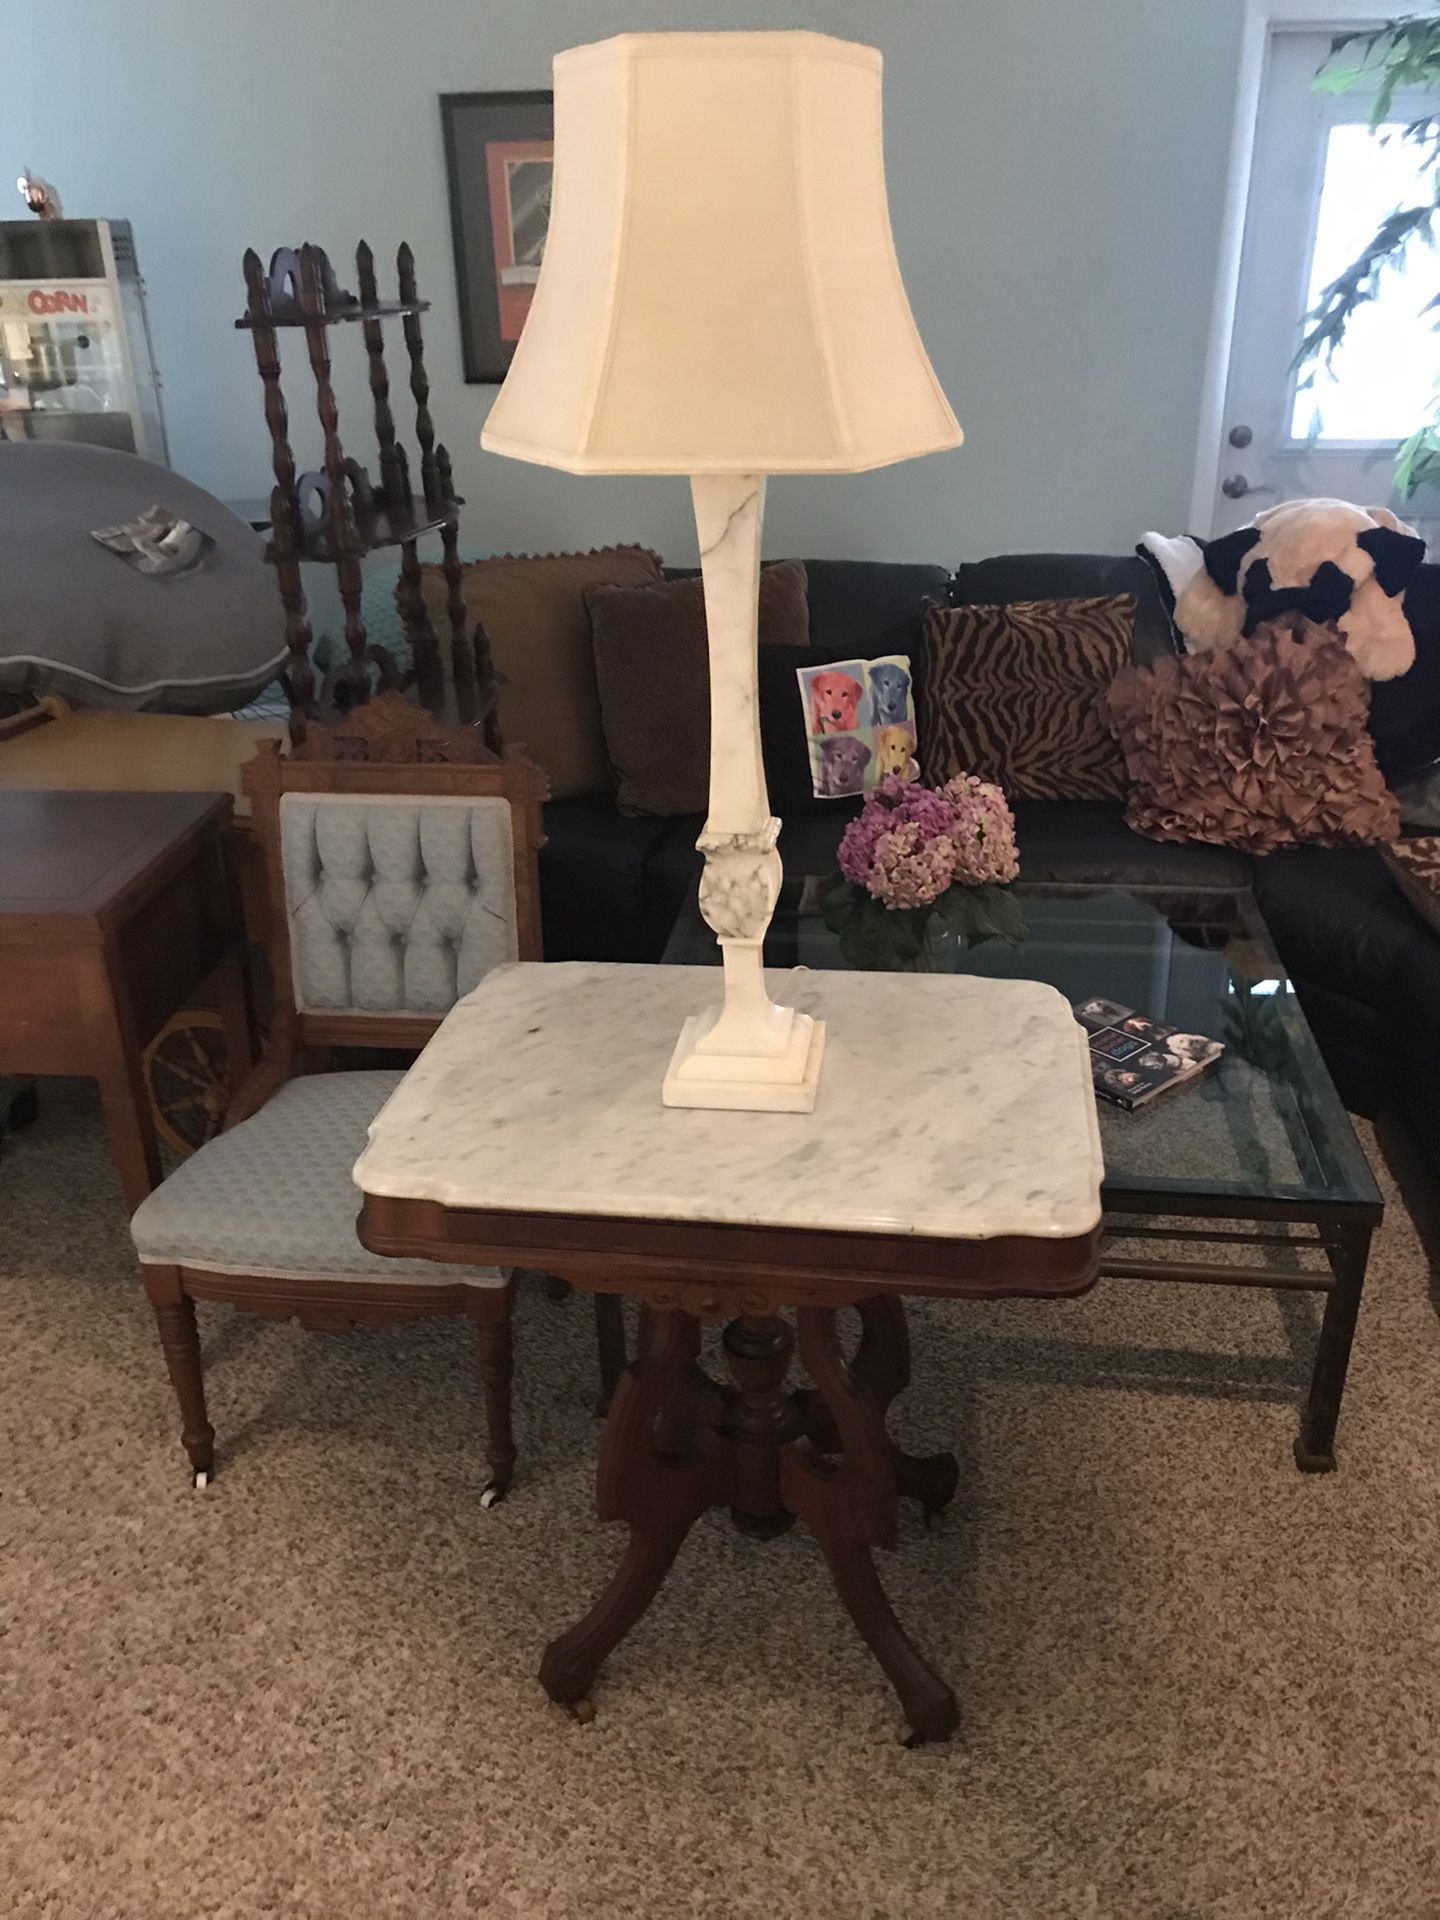 Vintage marble table and lamp